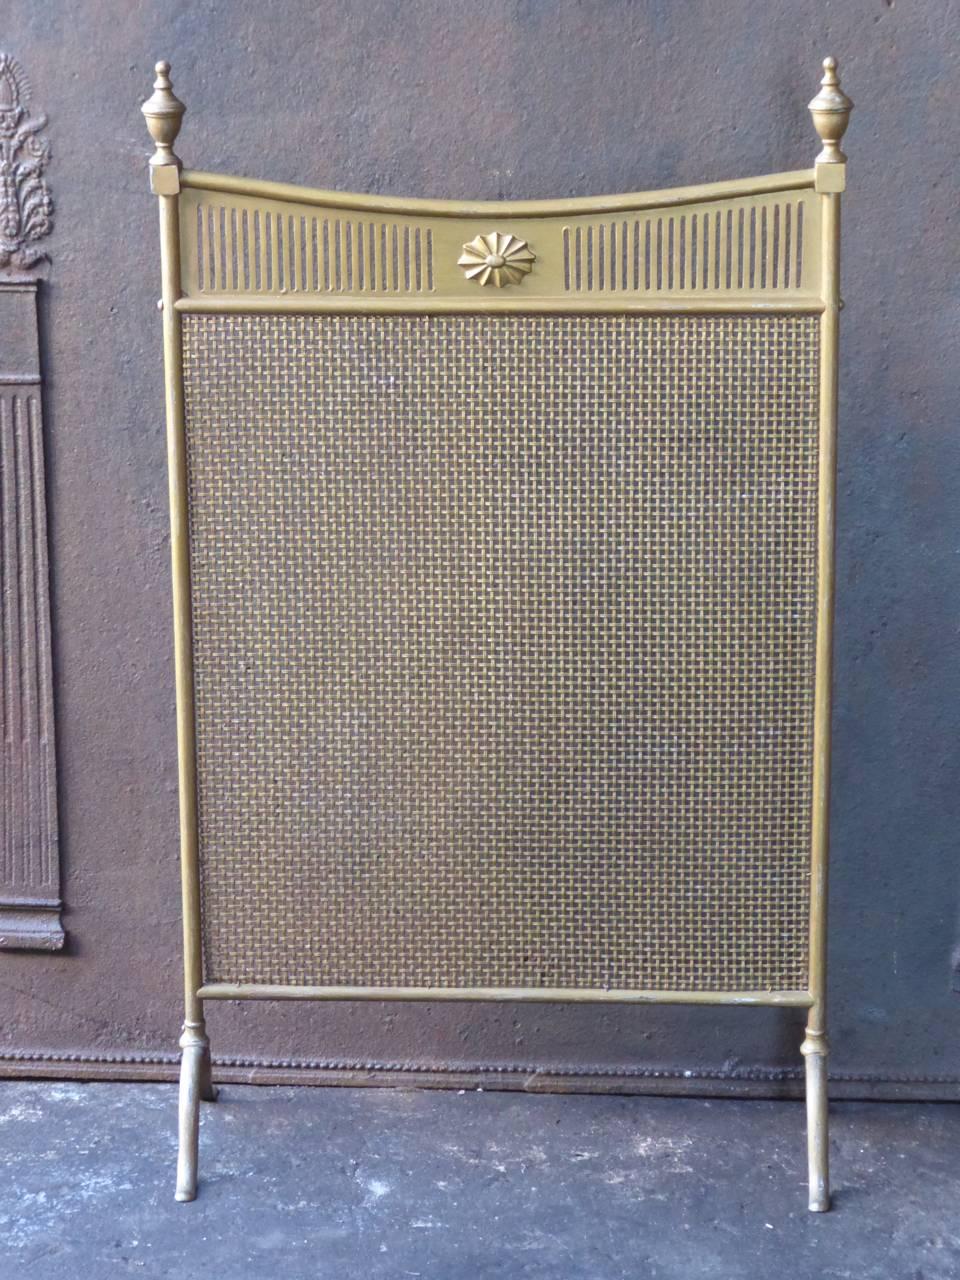 19th century English neoclassical firescreen made of brass.